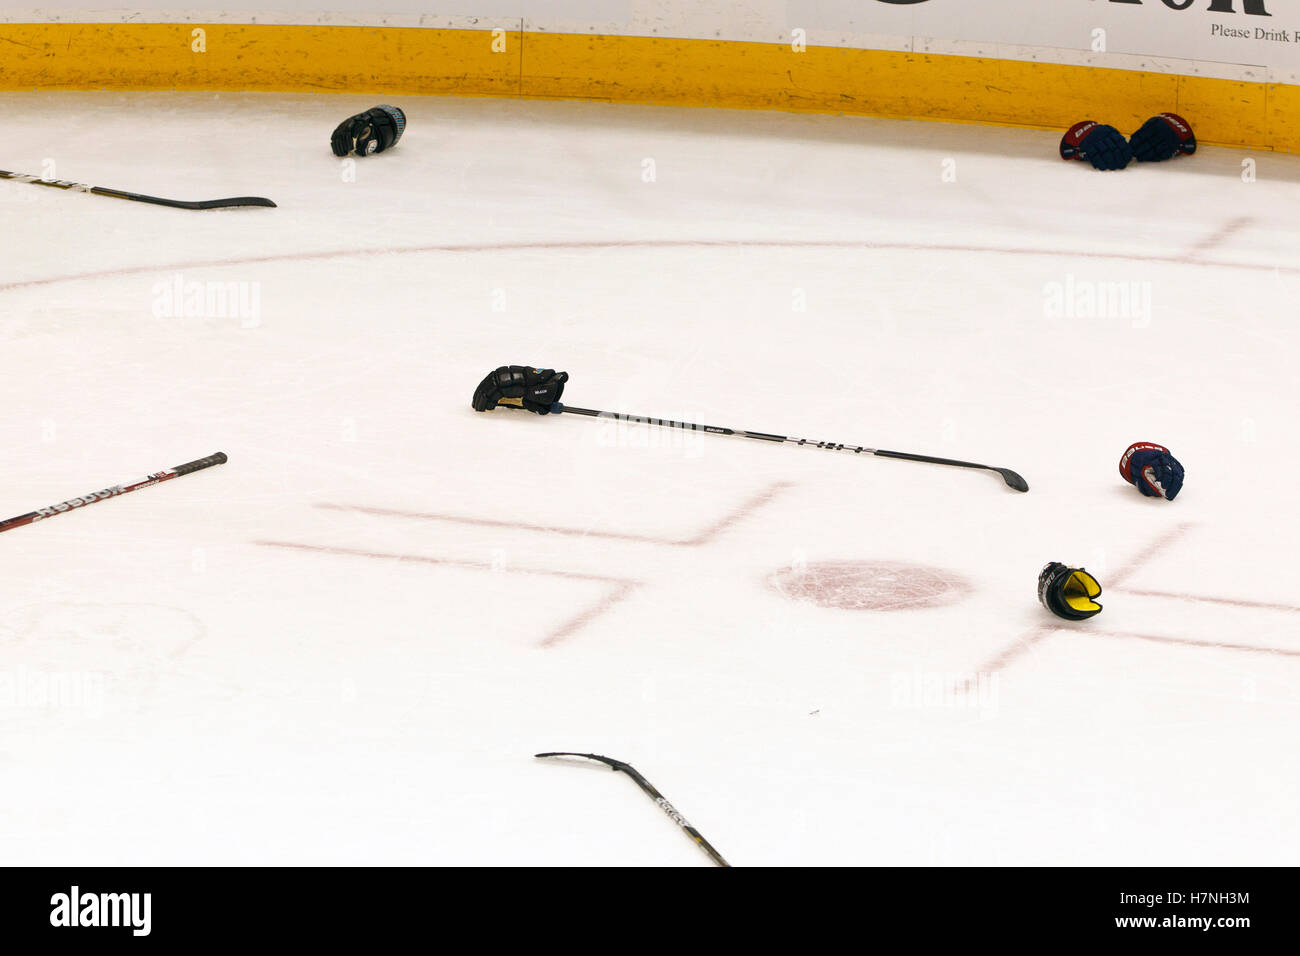 Jan 31, 2012; San Jose, CA, USA; General view of hockey sticks and gloves on the ice after a fight between the San Jose Sharks and the Columbus Blue Jackets during the third period at HP Pavilion. San Jose defeated Columbus 6-0. Stock Photo